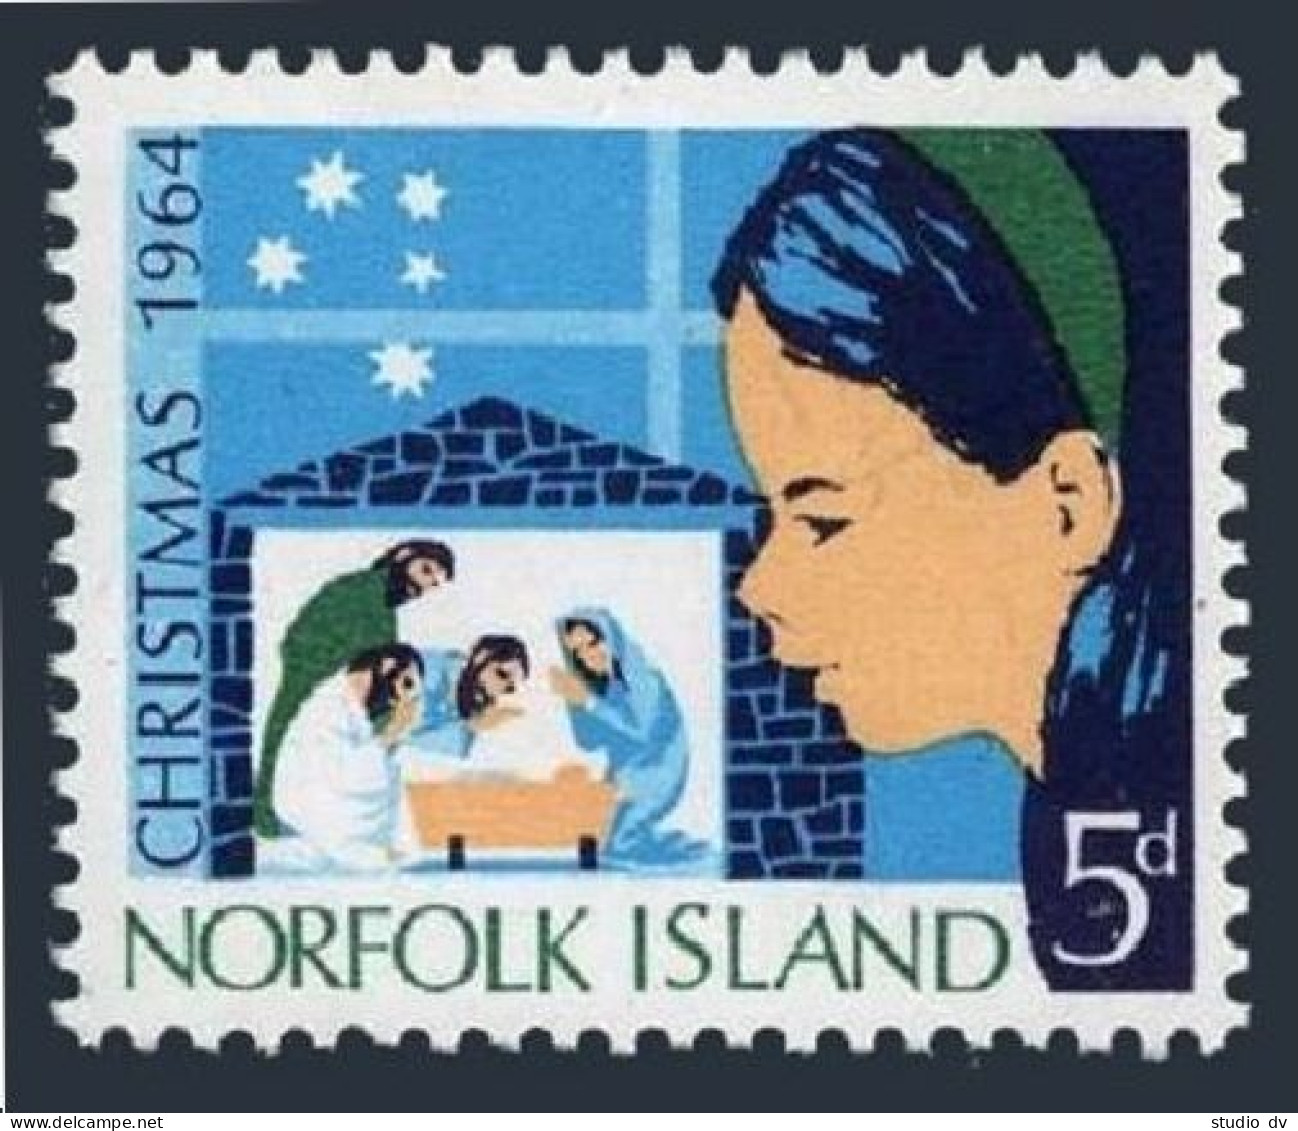 Norfolk 68 Two Stamps,MNH.Michel 59. Christmas 1964,Child. - Norfolk Island